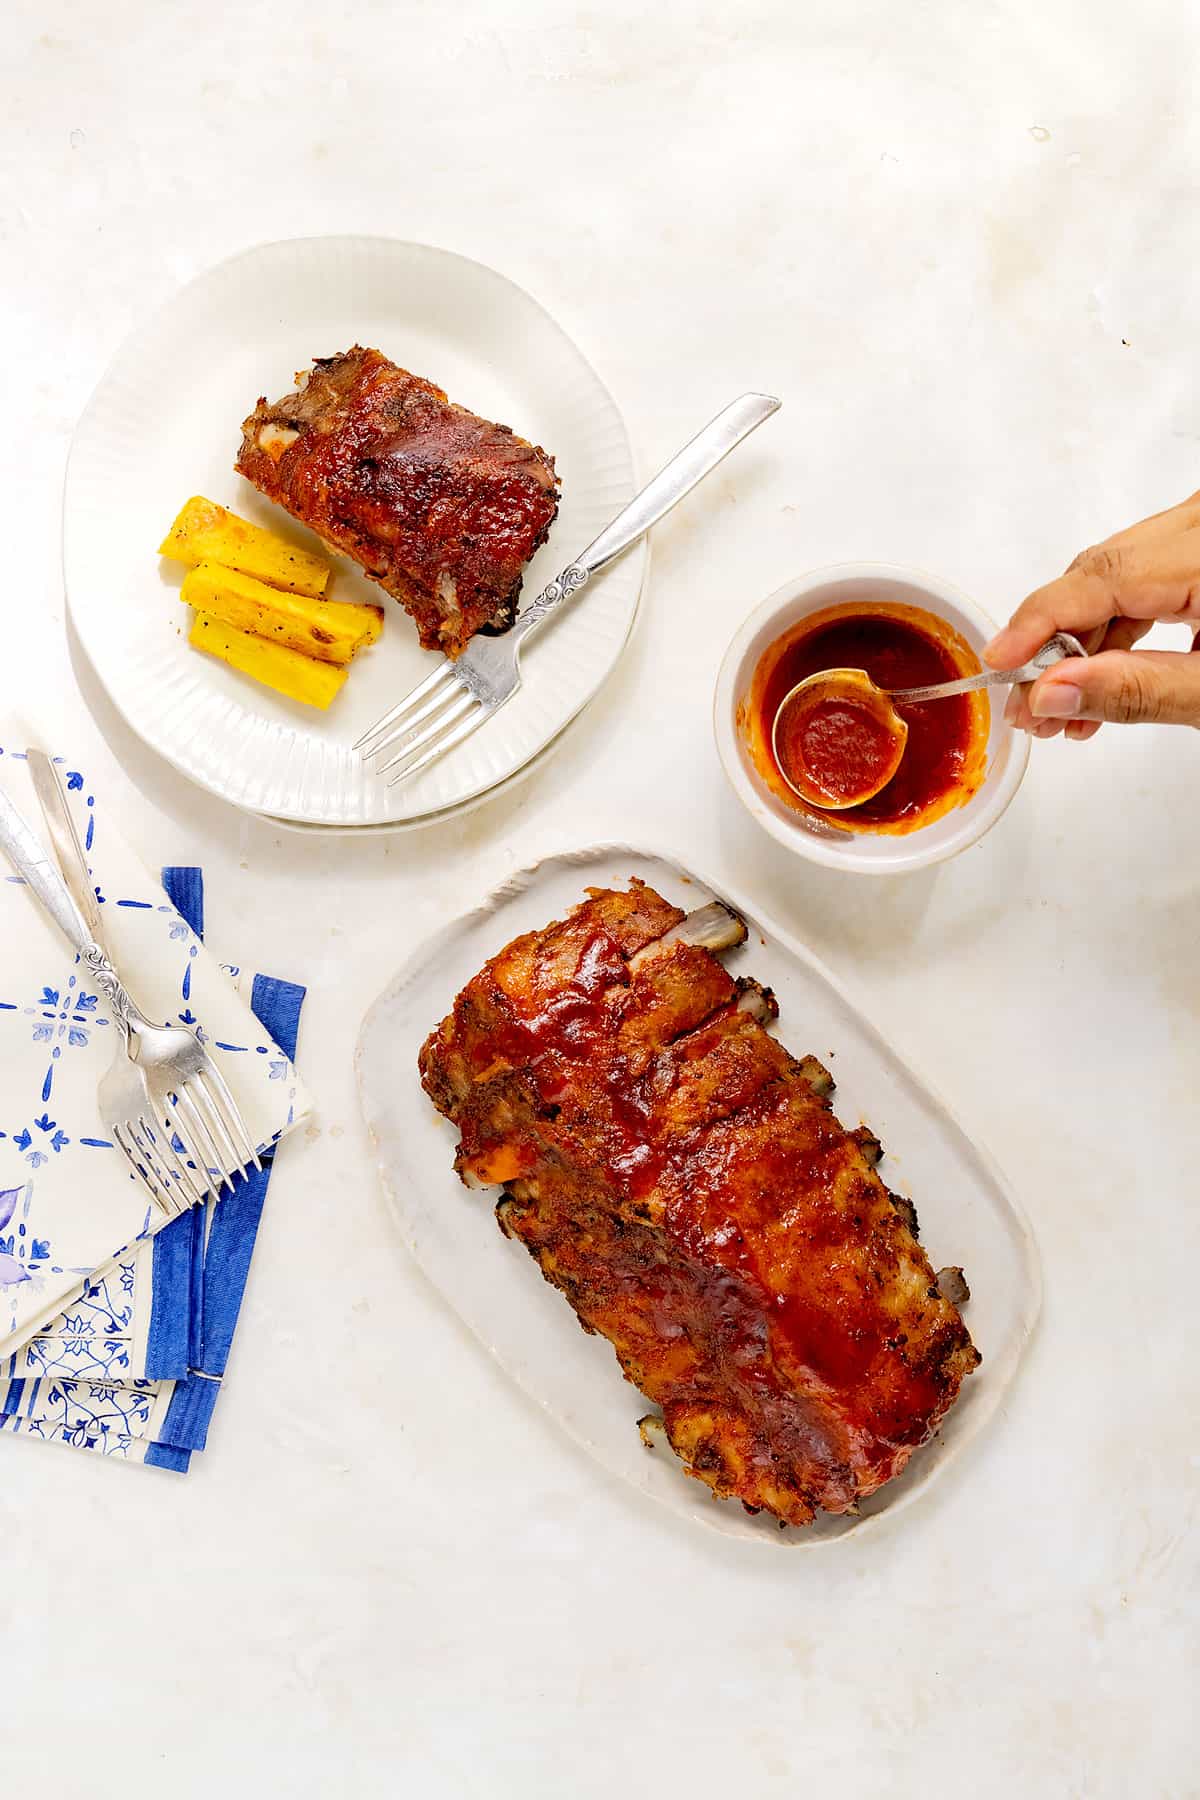 Sticky rum BBQ sauce with ribs.